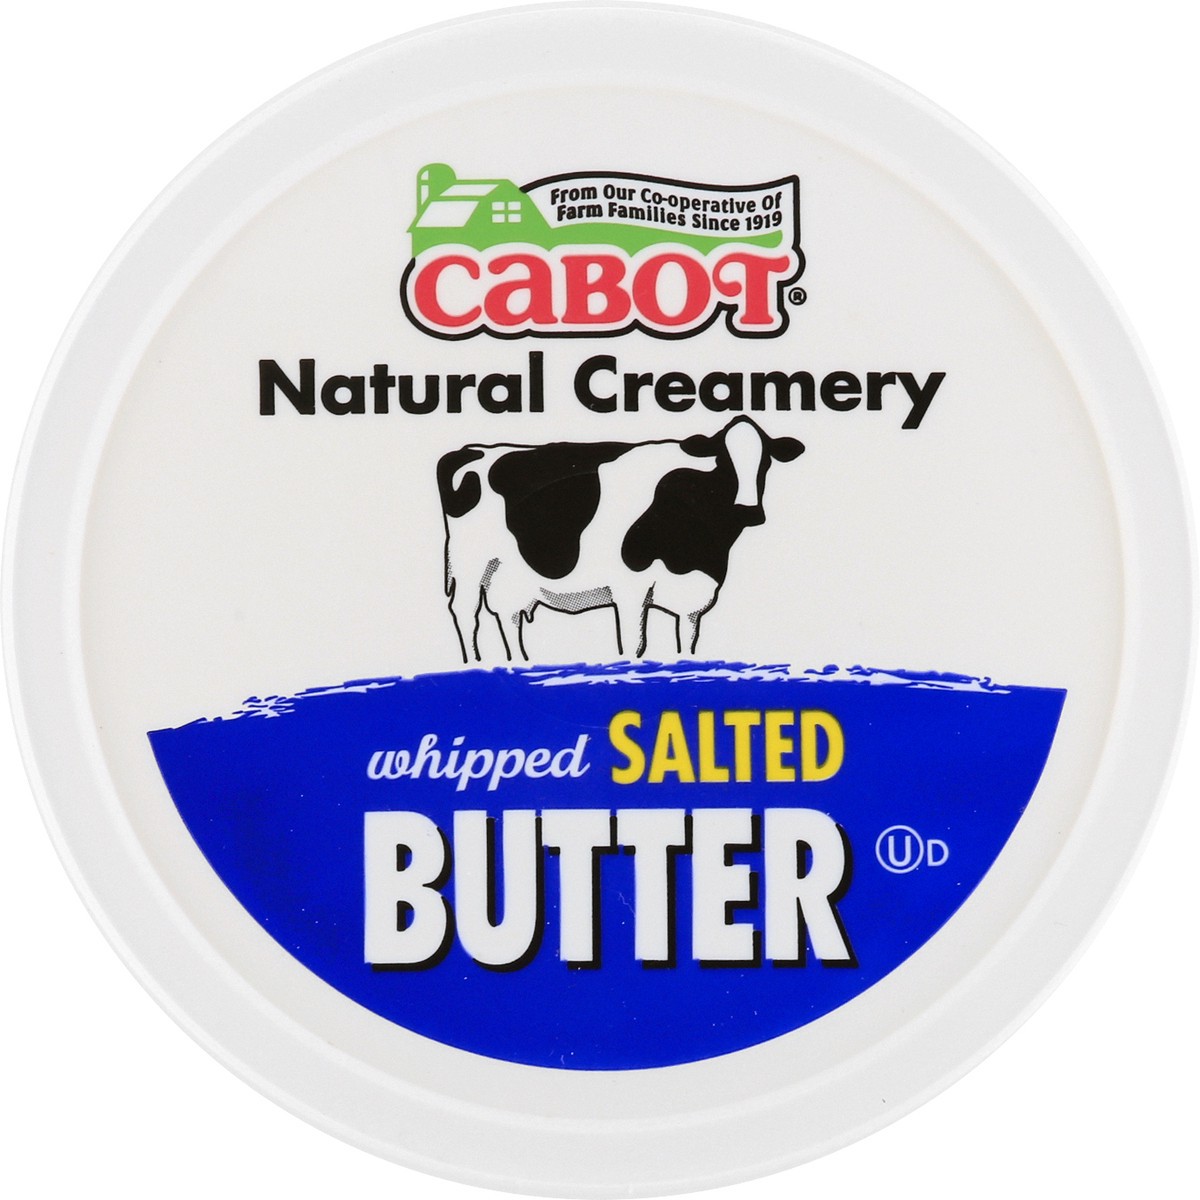 slide 12 of 13, Cabot Whipped Salted Butter 8 oz, 8 oz